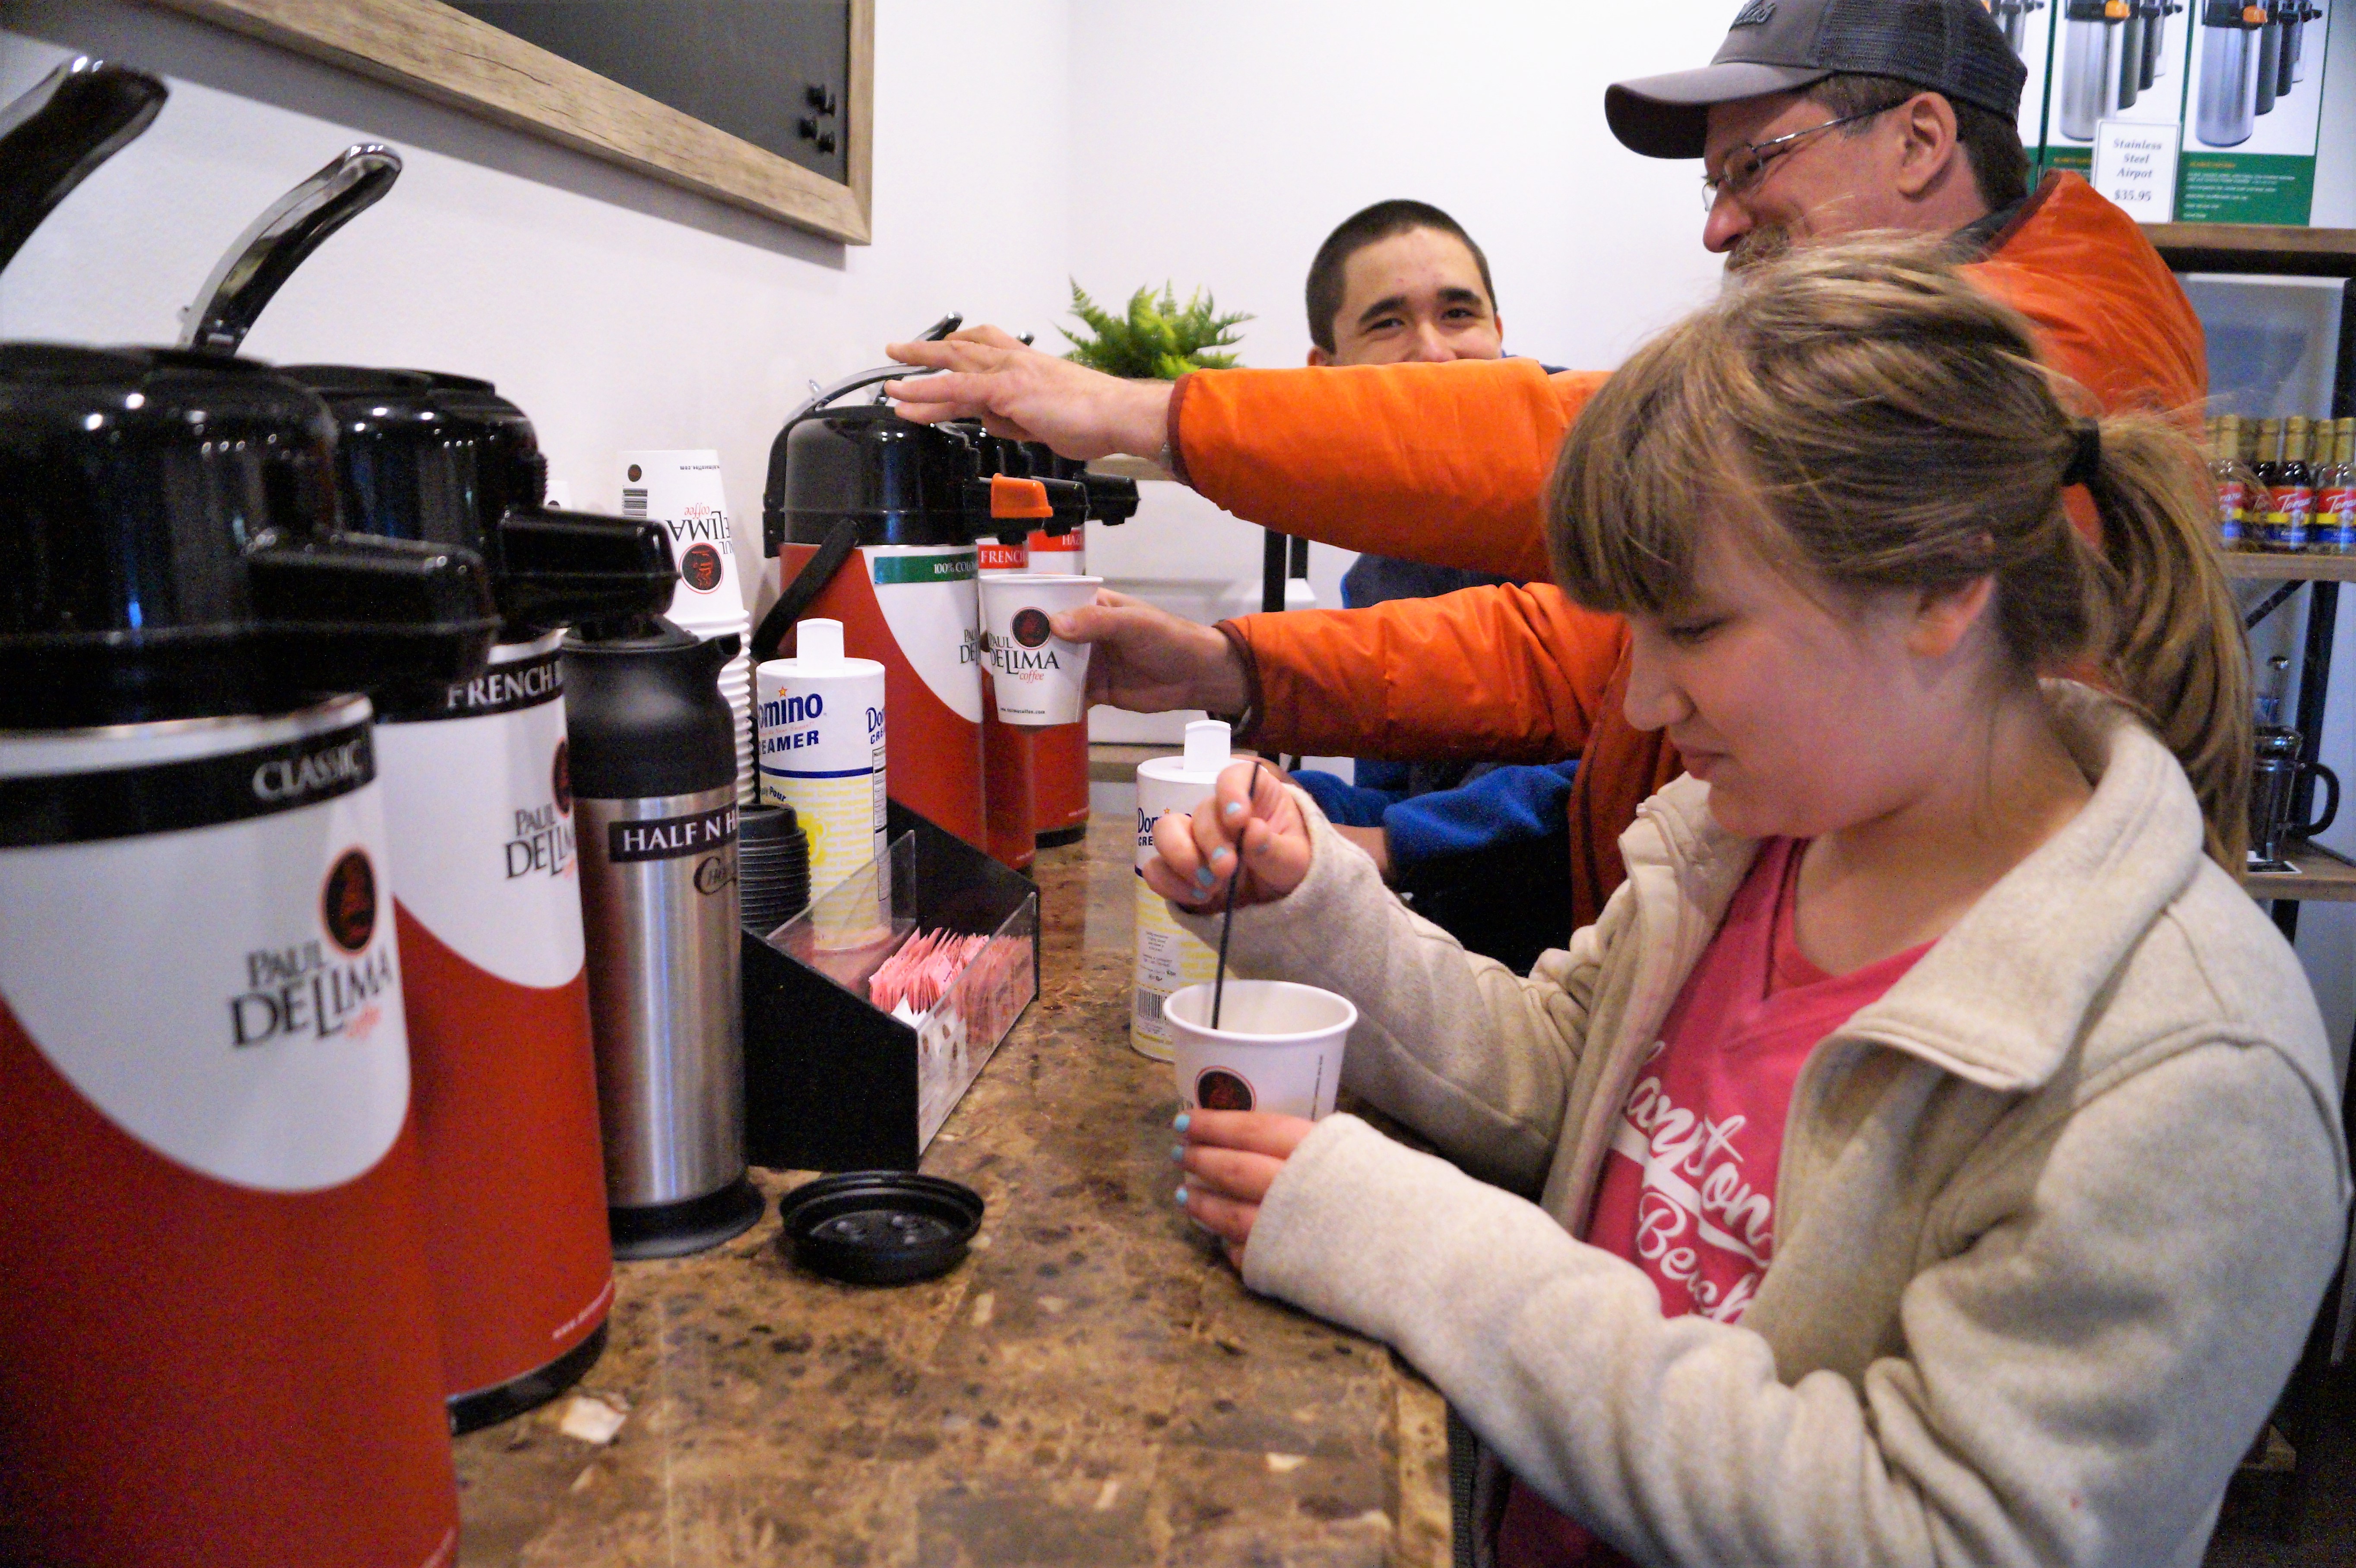 Customers getting coffee at the complementary coffee bar at the Paul deLima store.